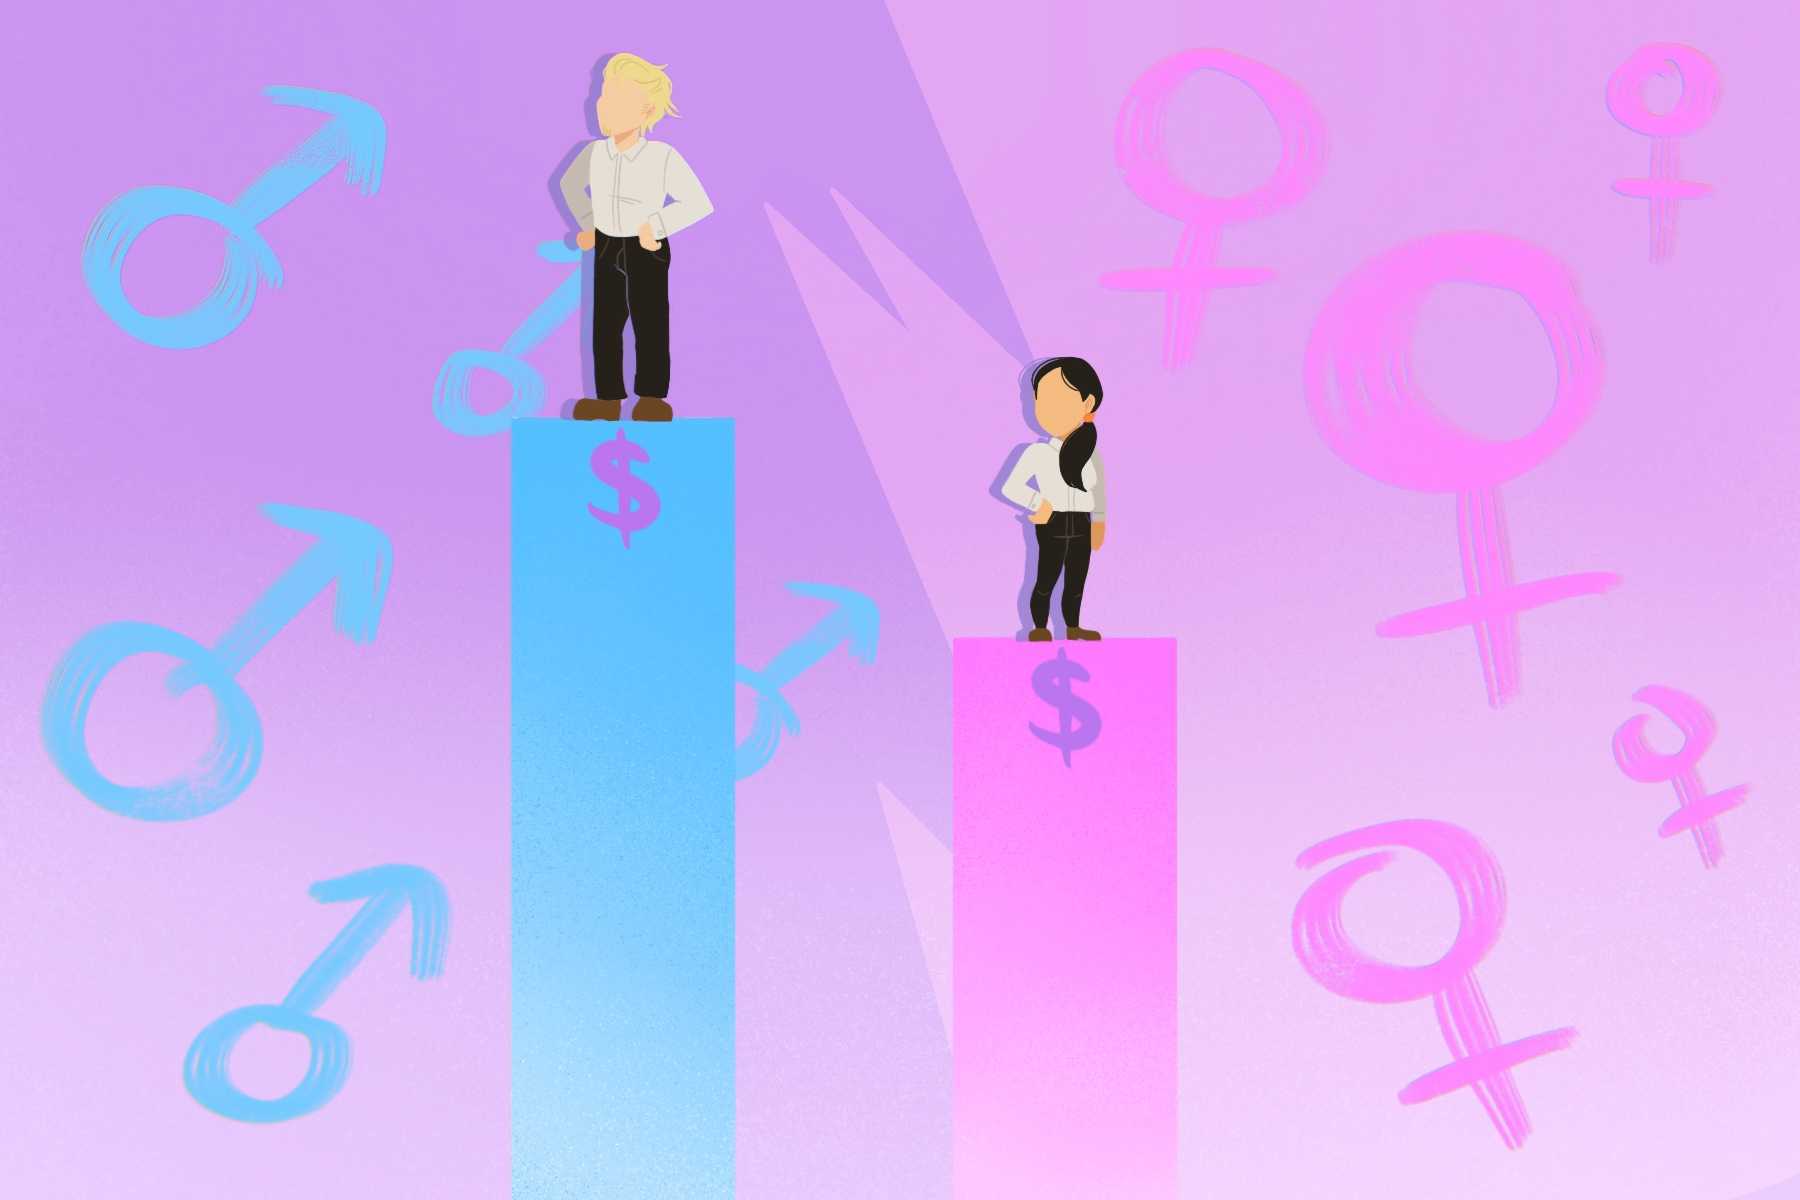 in an article about the gender pay gap, a male earning more money